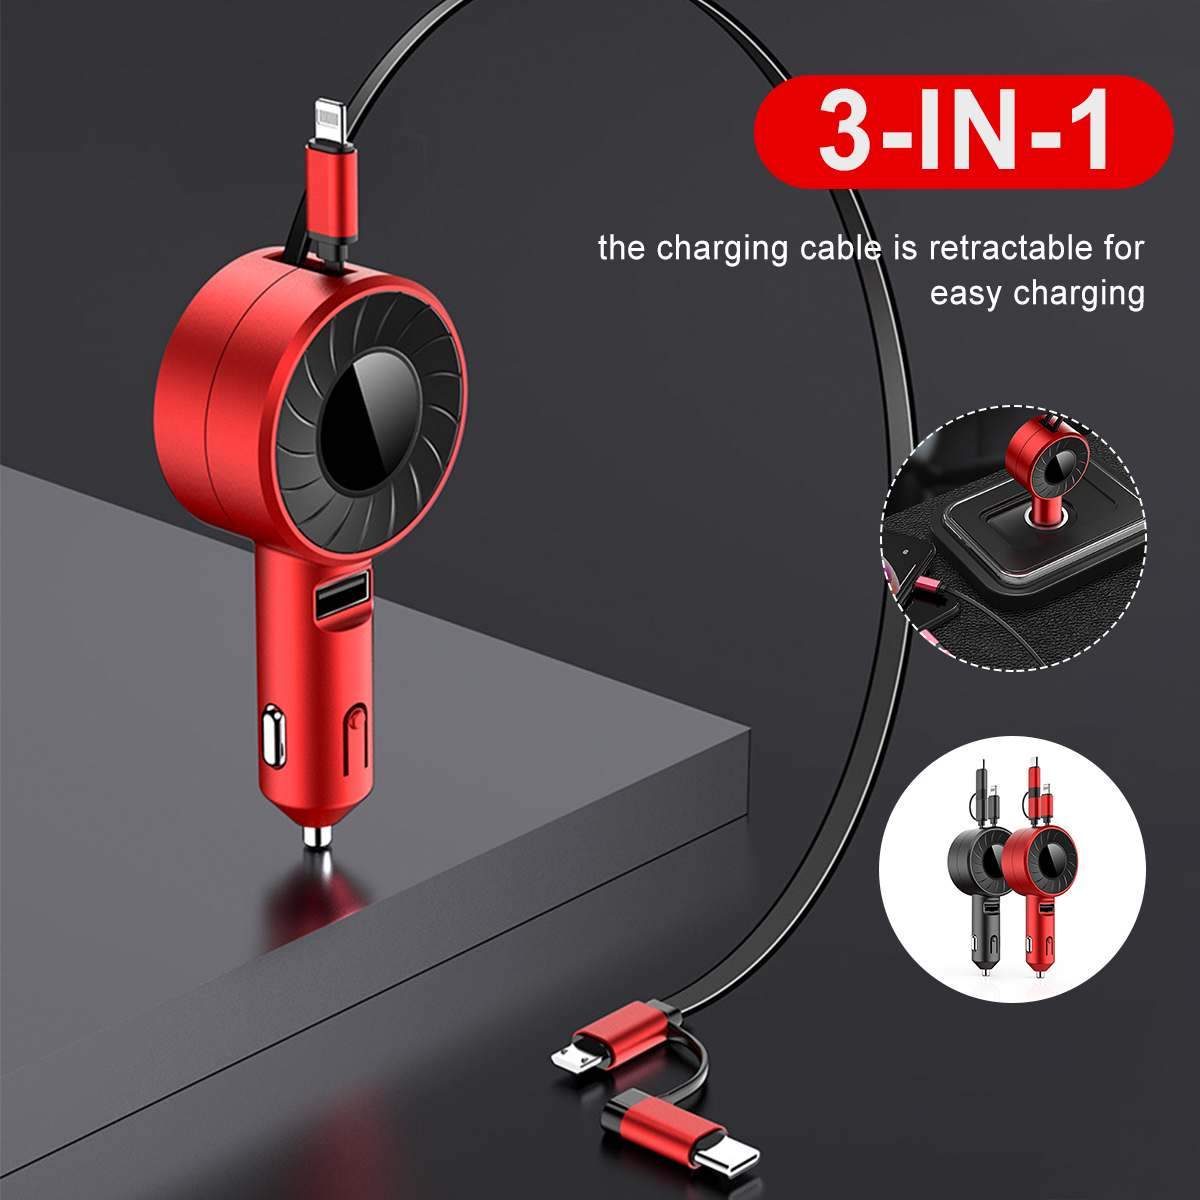 3 in 1 Retractable Car Charger – Premierity